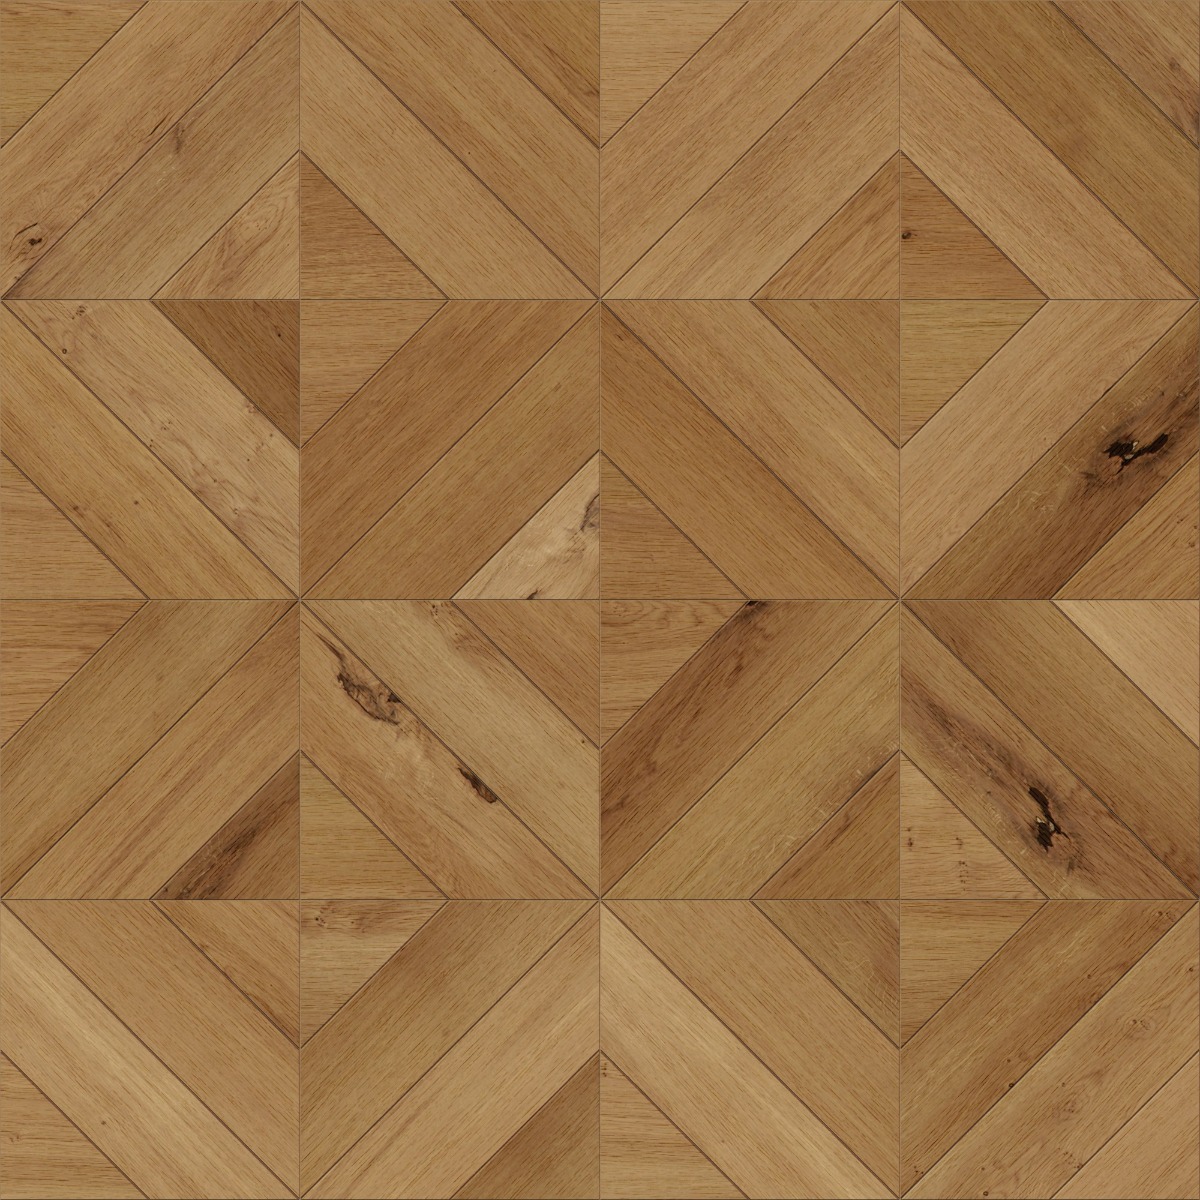 A seamless wood texture with oak boards arranged in a Chevron Diamond pattern